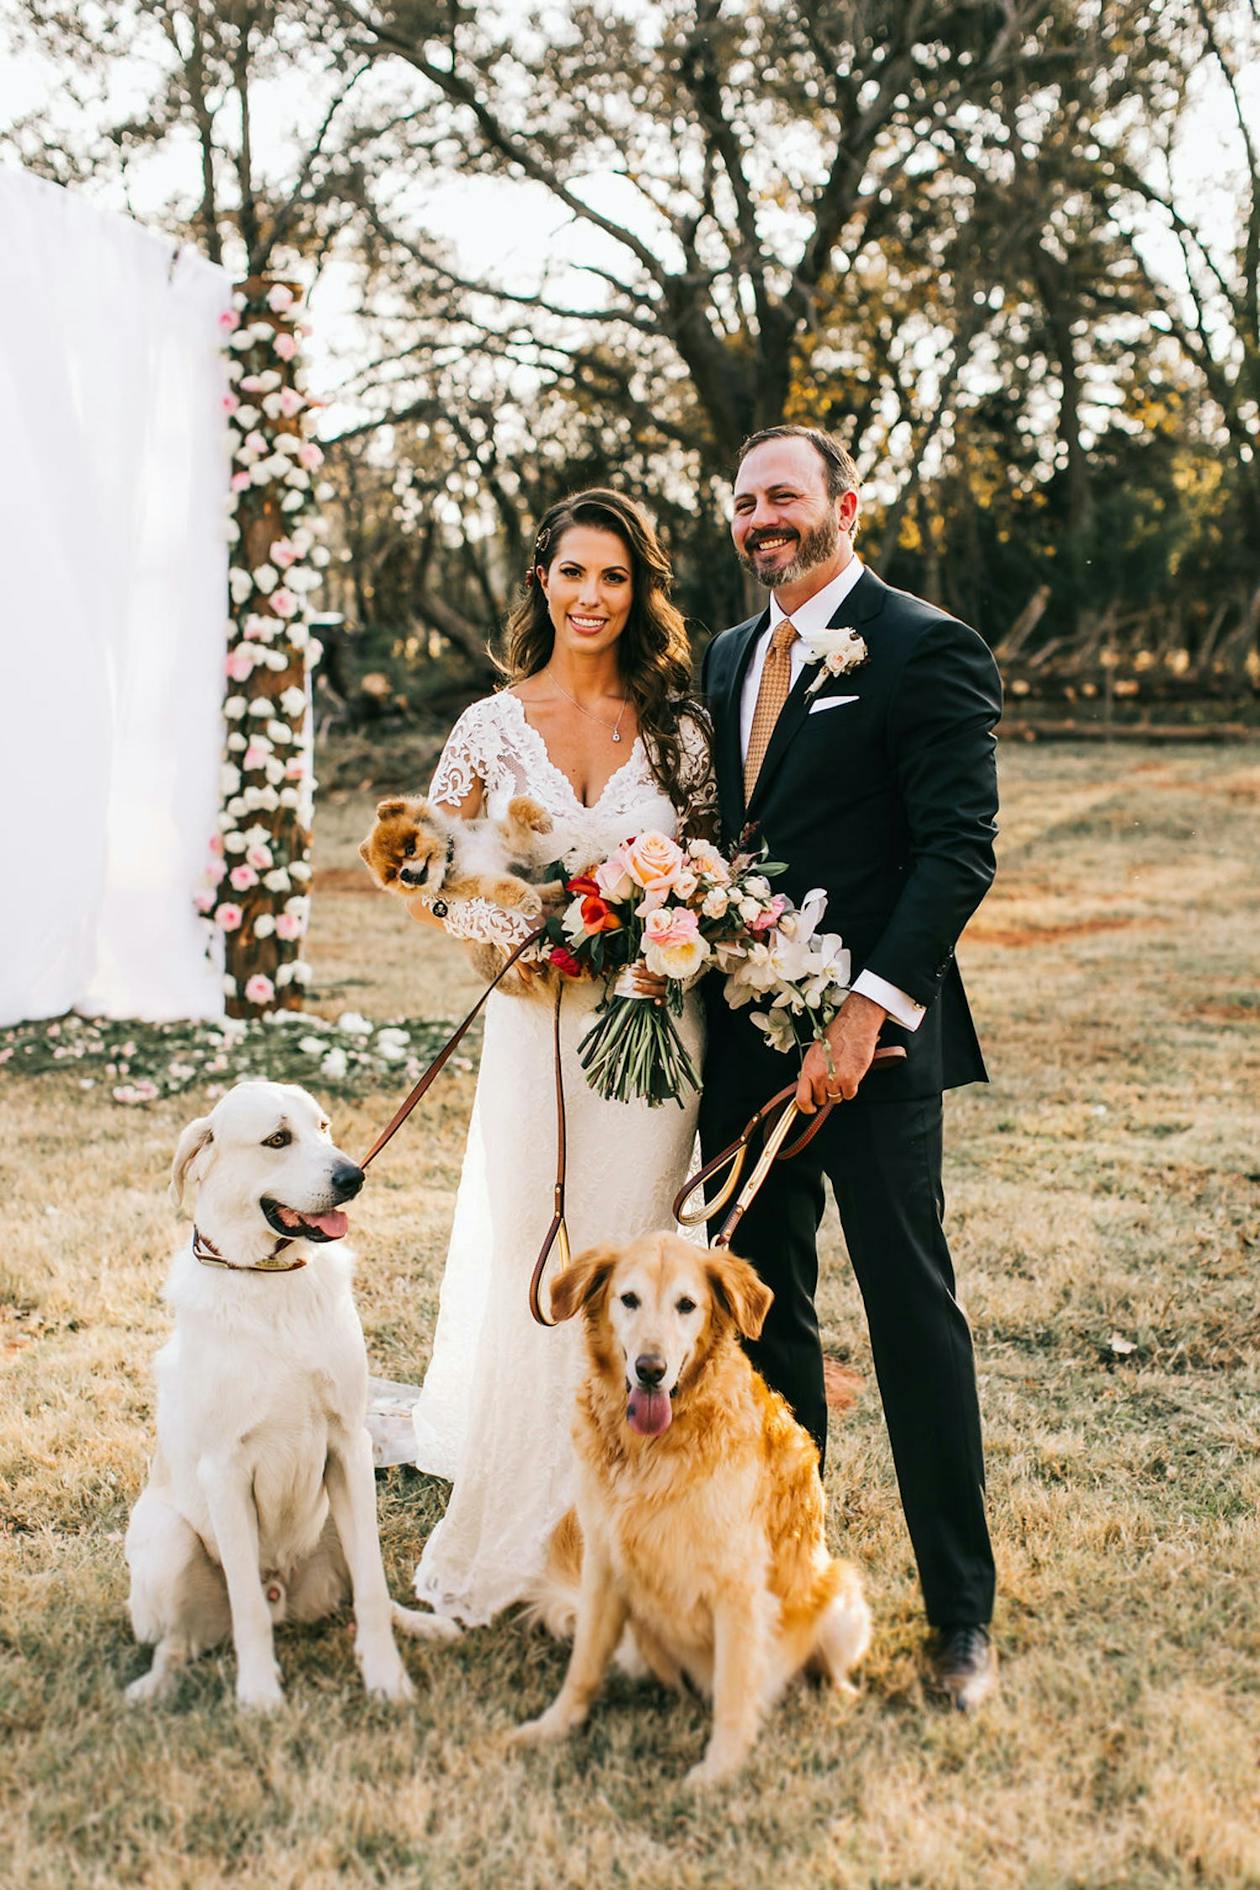 bride and groom posing with two dogs on leashes | PartySlate